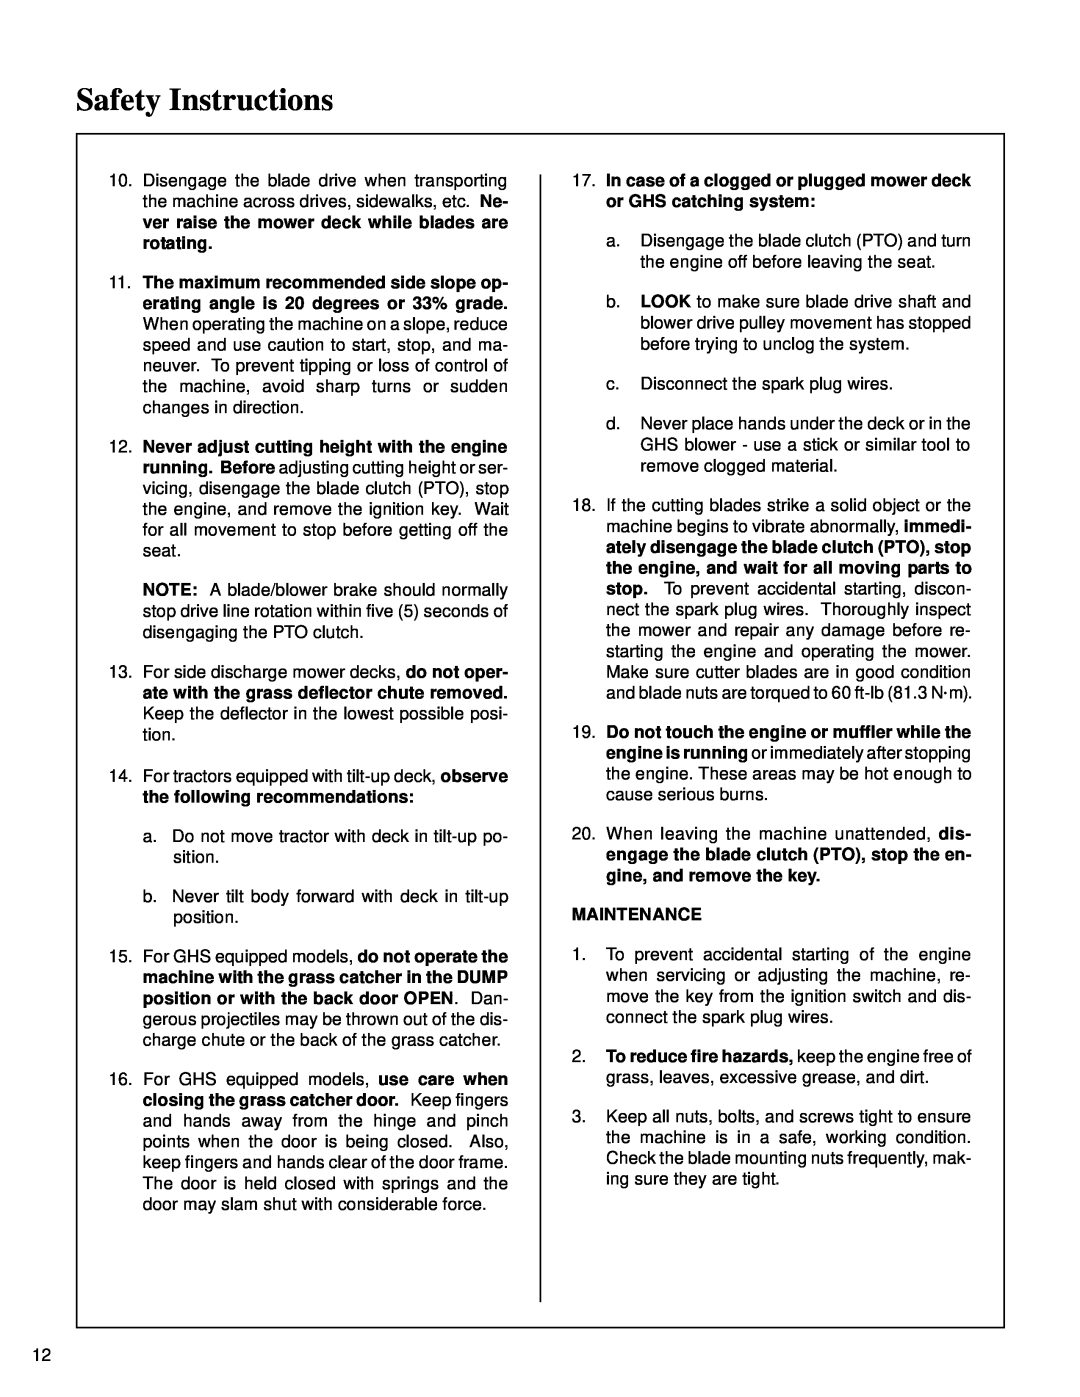 Walker MT owner manual Safety Instructions, In case of a clogged or plugged mower deck or GHS catching system, Maintenance 